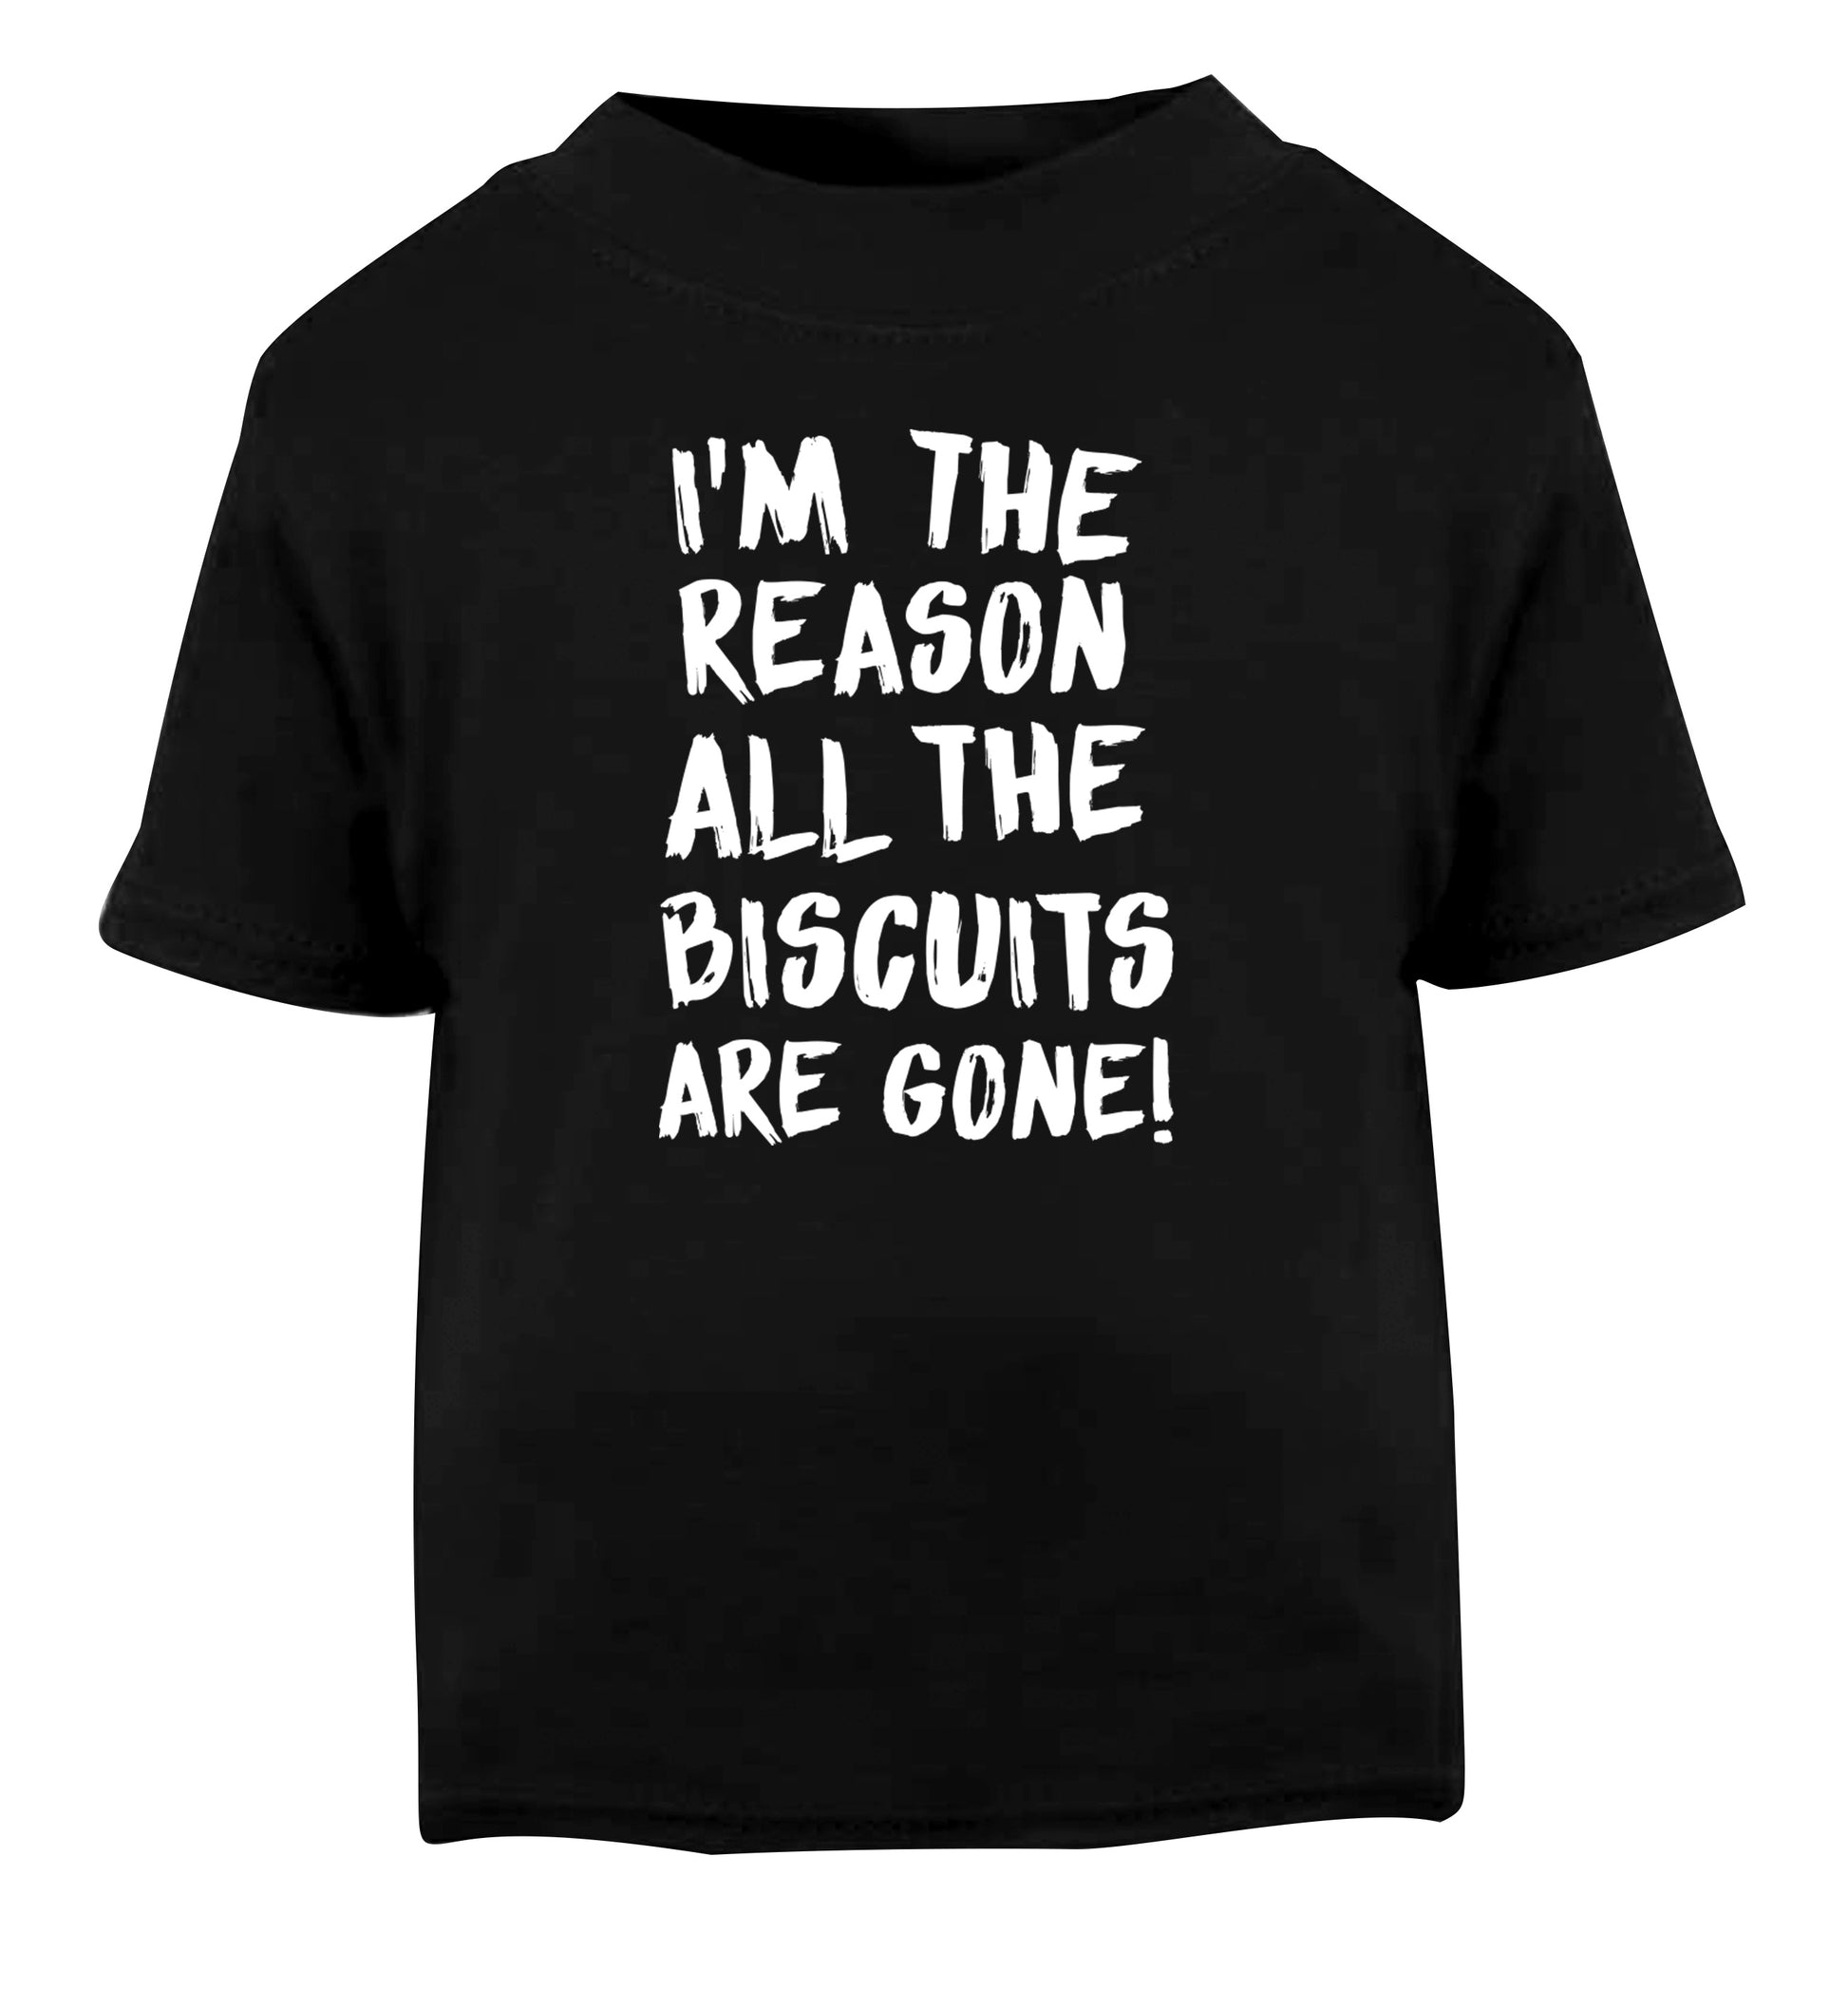 I'm the reason why all the biscuits are gone Black Baby Toddler Tshirt 2 years